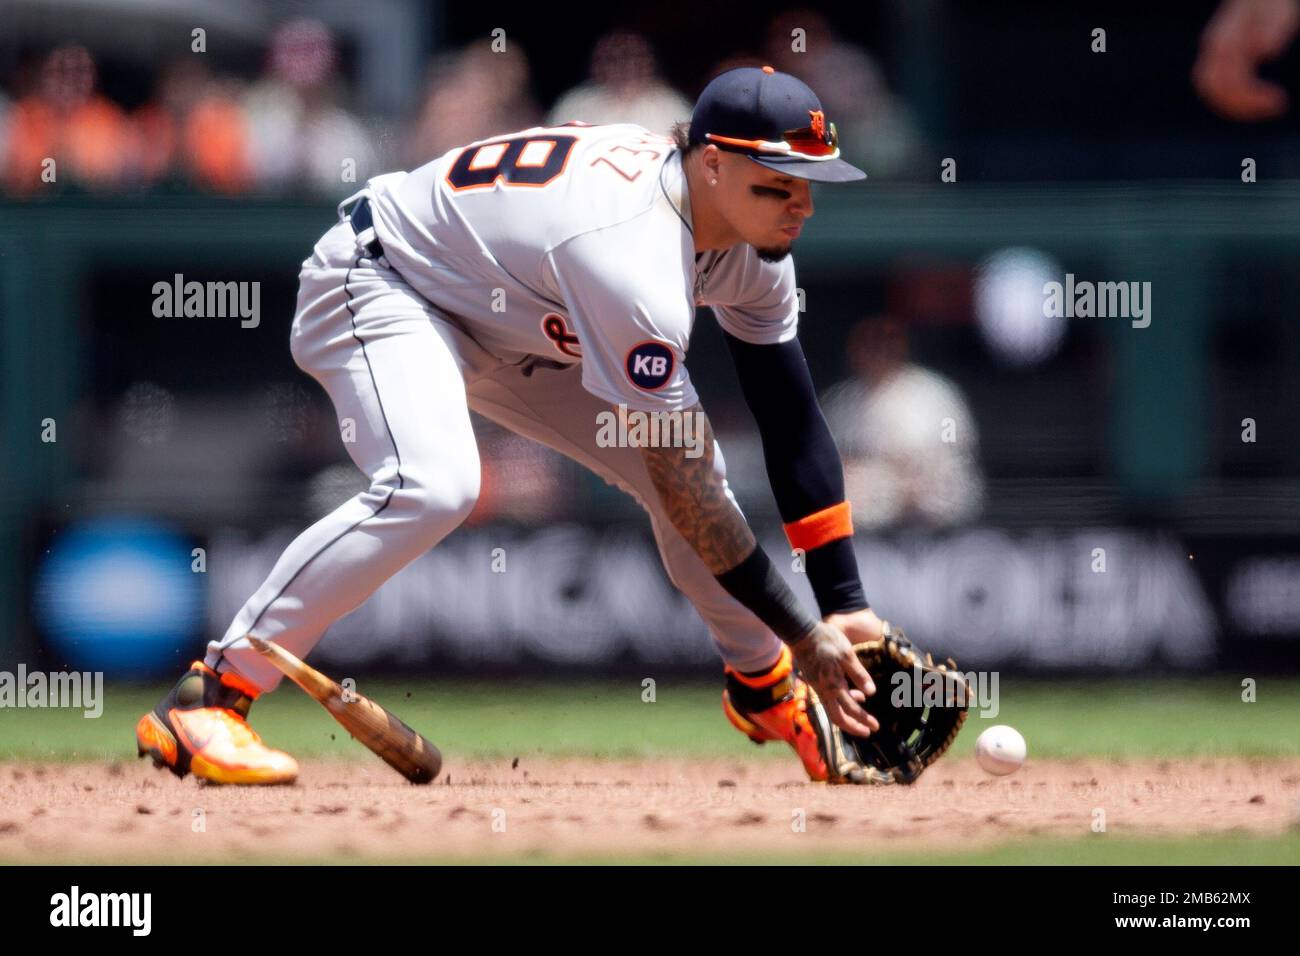 Javier Baez of the Detroit Tigers runs in action against the San